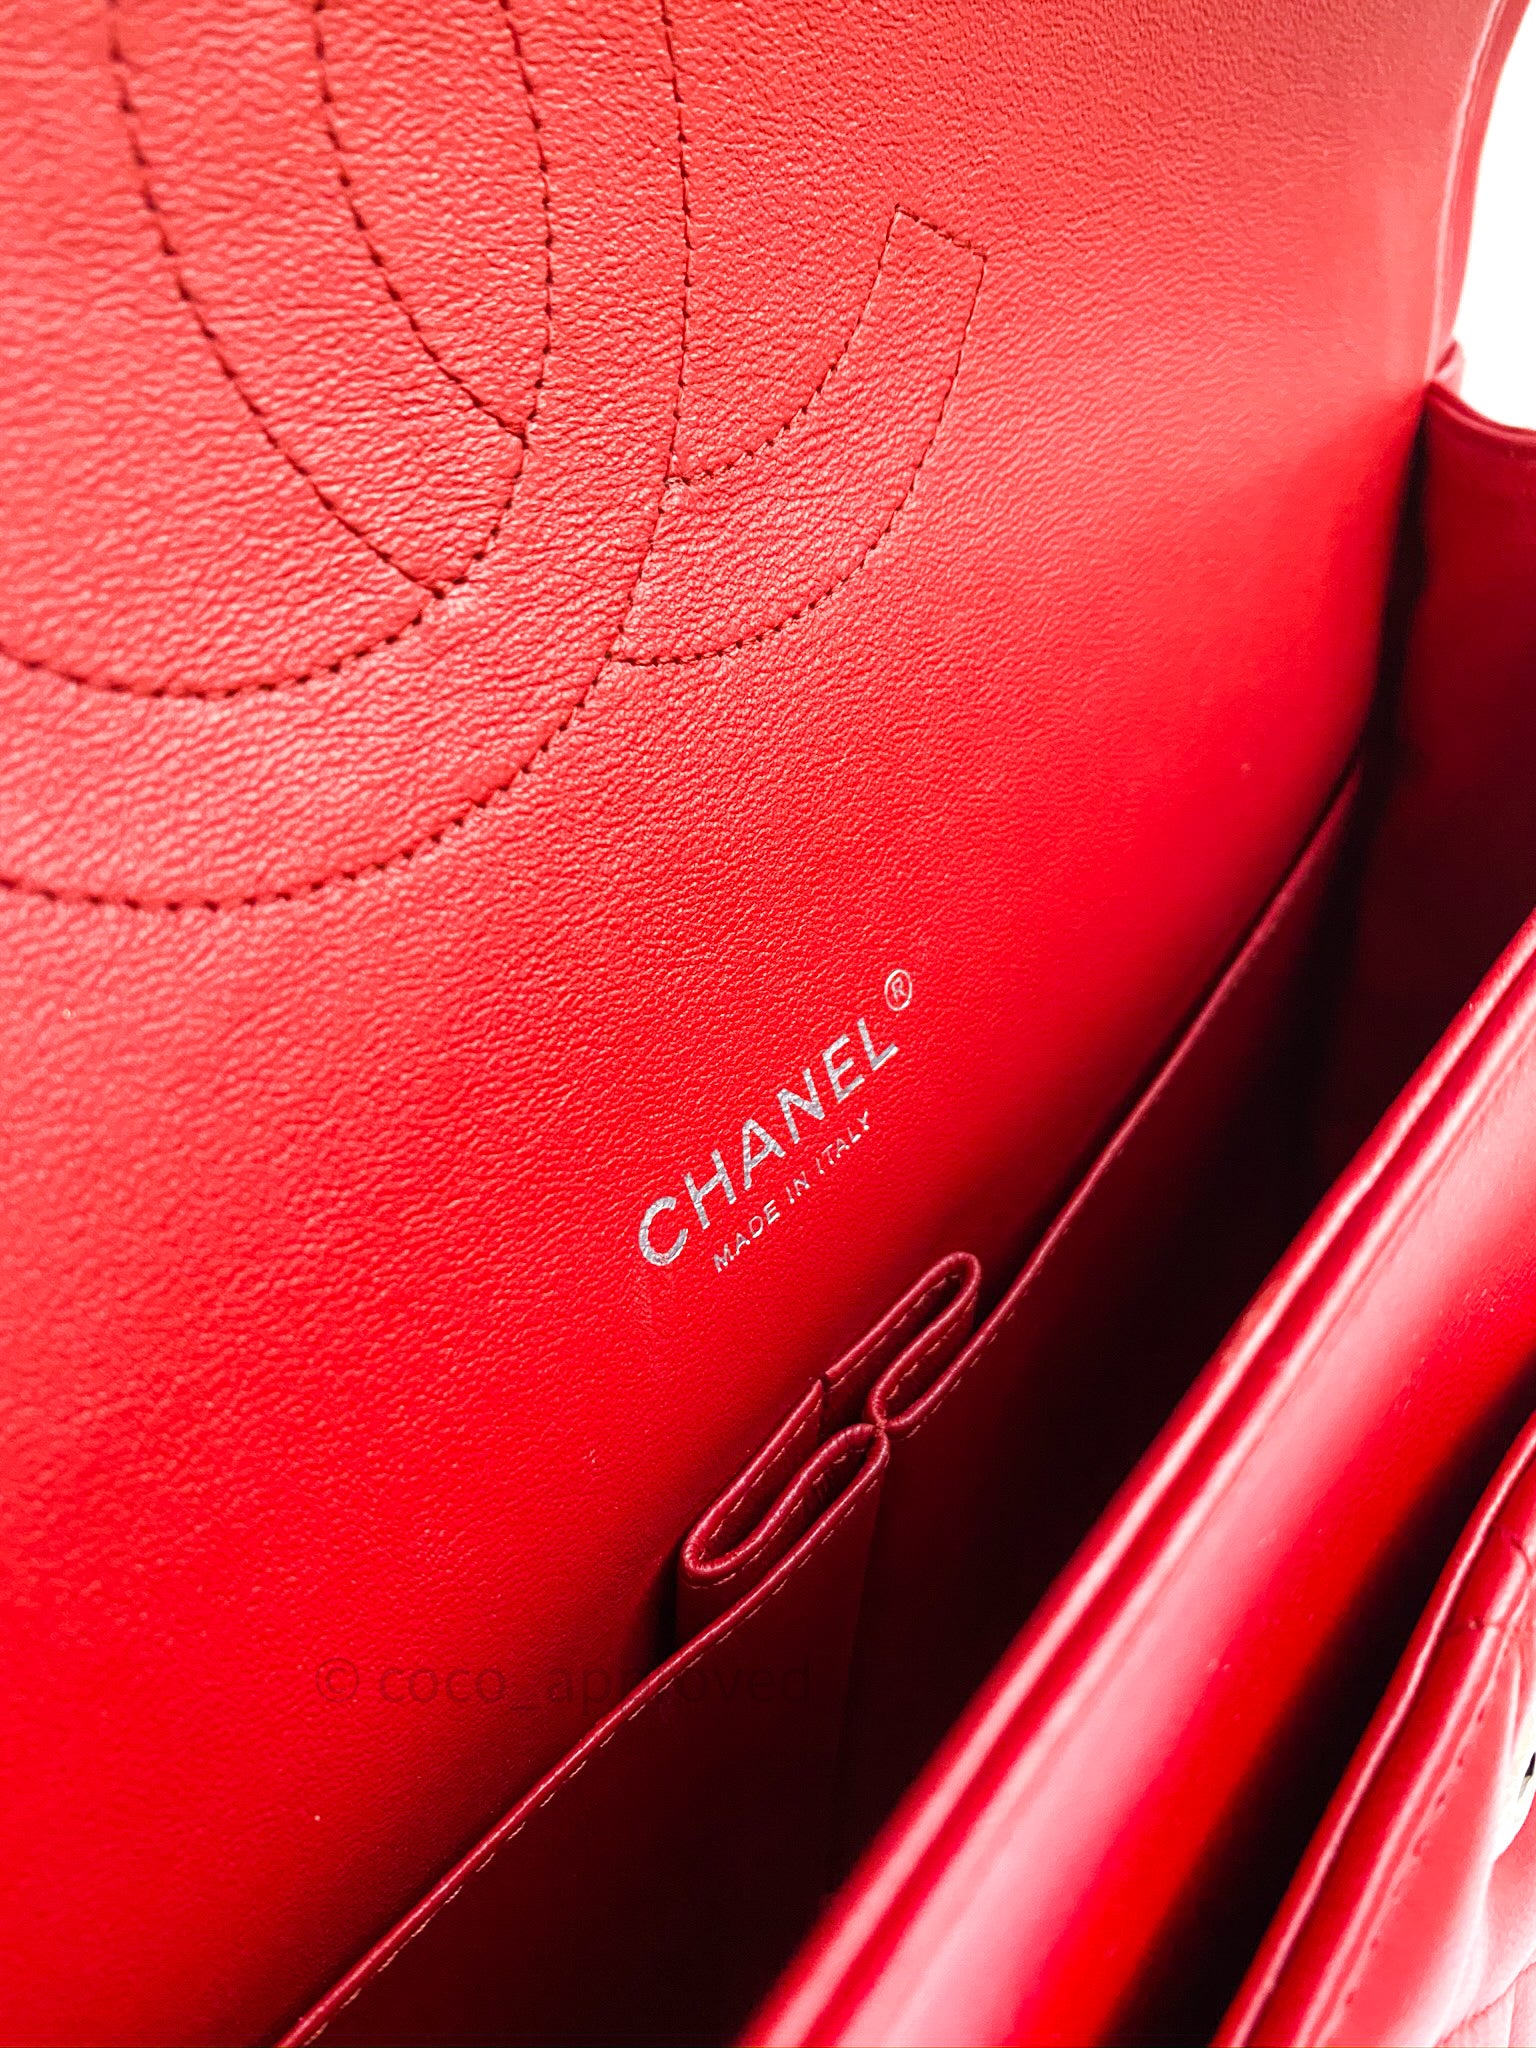 CHANEL Red Caviar Leather Classic Double Flap Maxi Bag Silver hardware